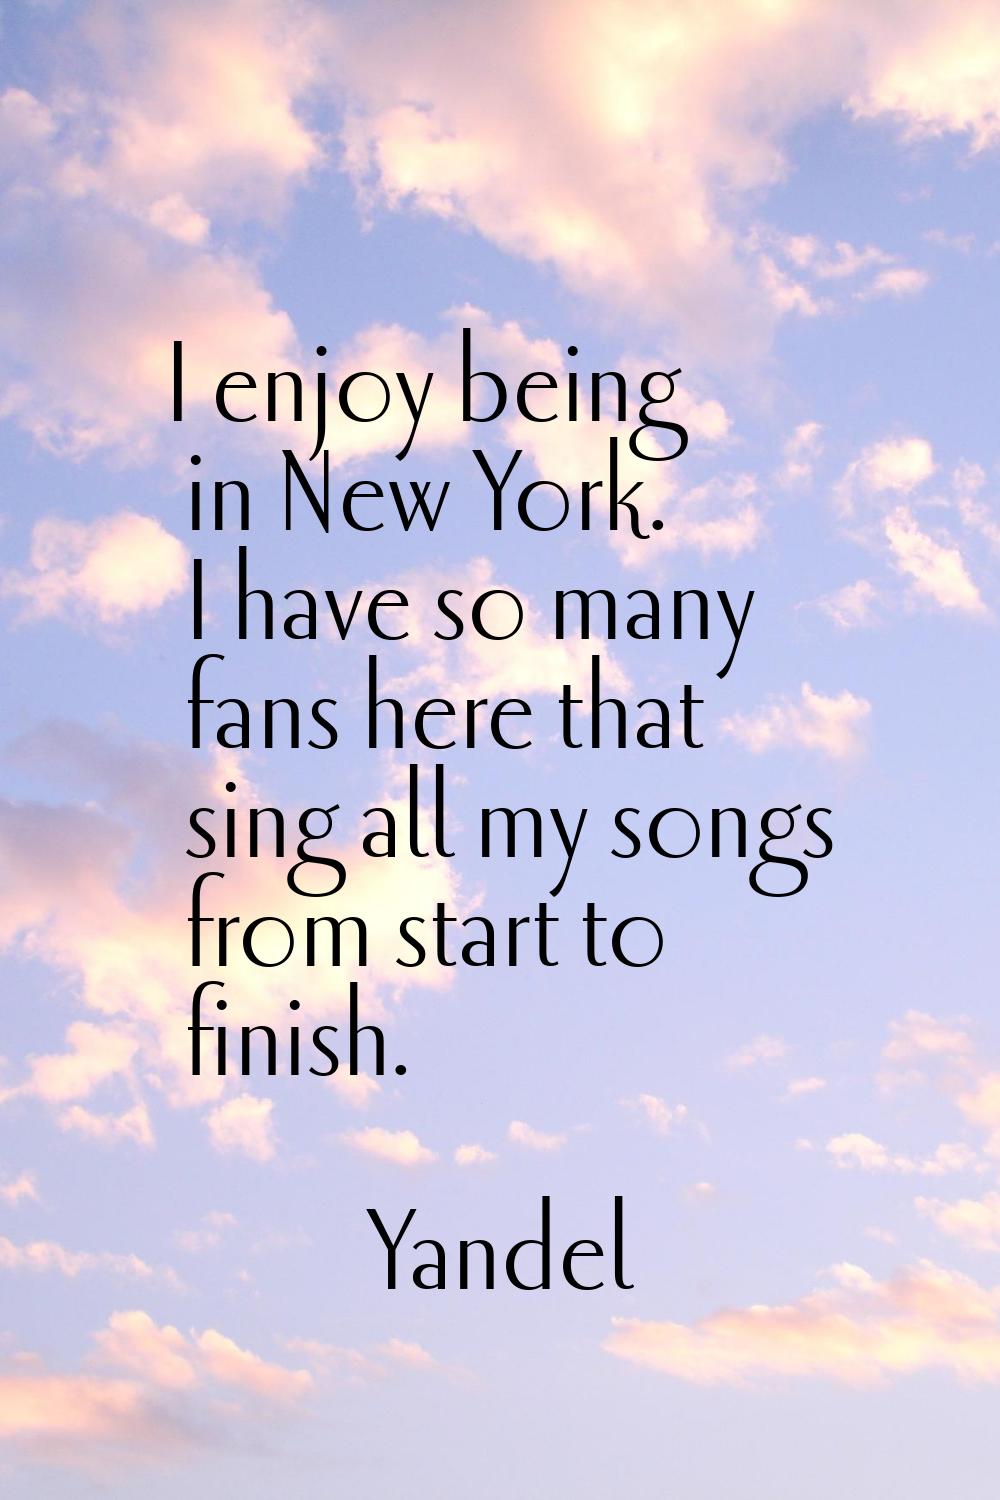 I enjoy being in New York. I have so many fans here that sing all my songs from start to finish.